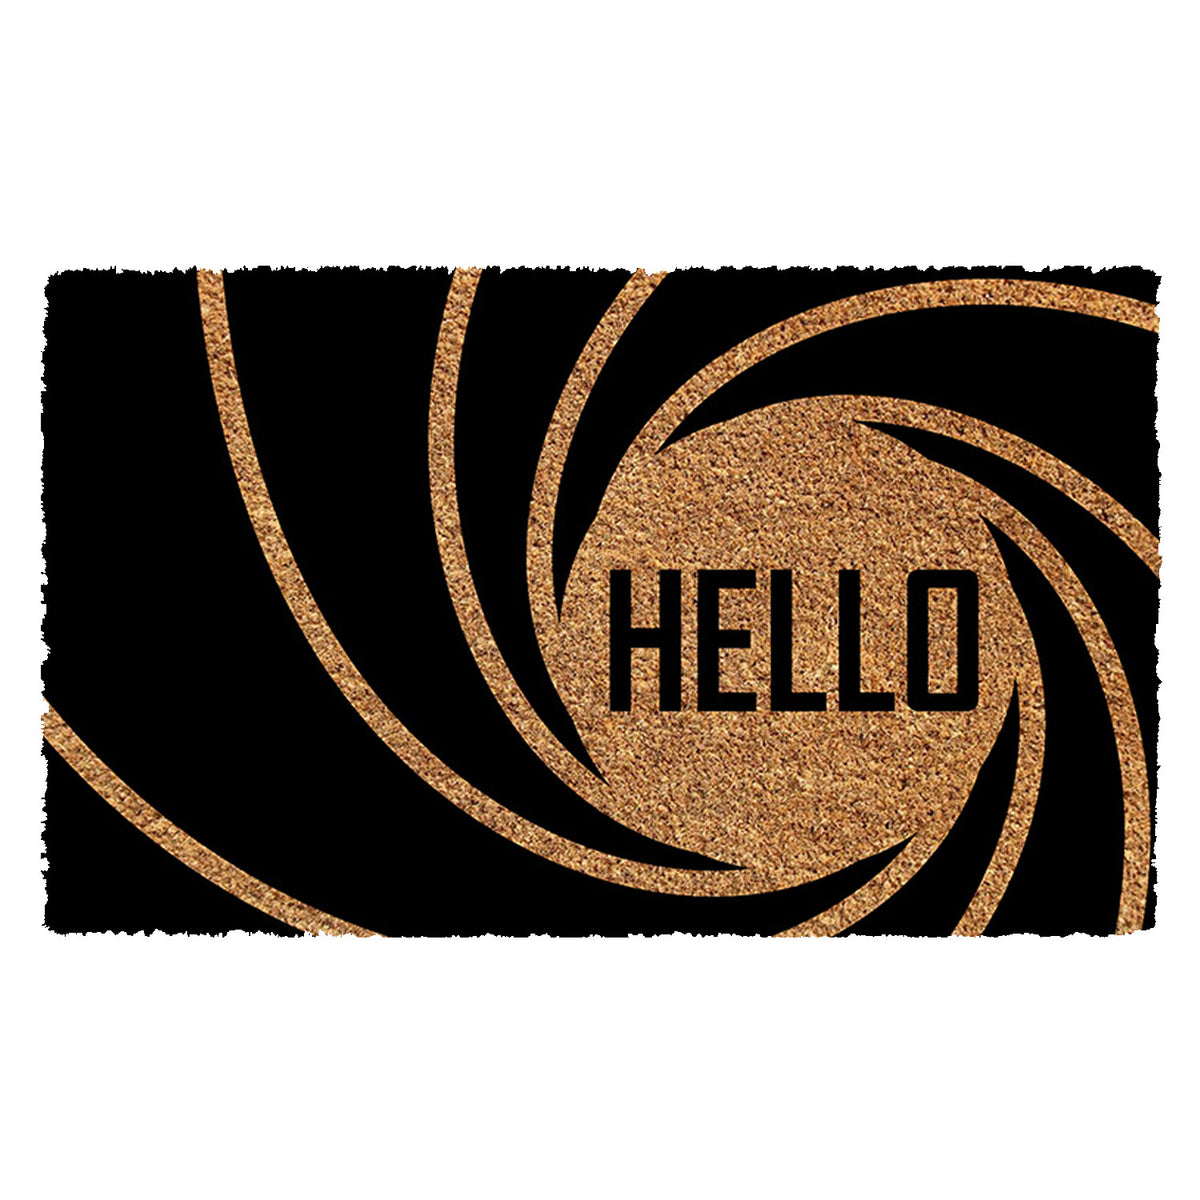 Hello Printed 007 Bond Natural Coir Doormat – Stylish and Durable Entryway Décor